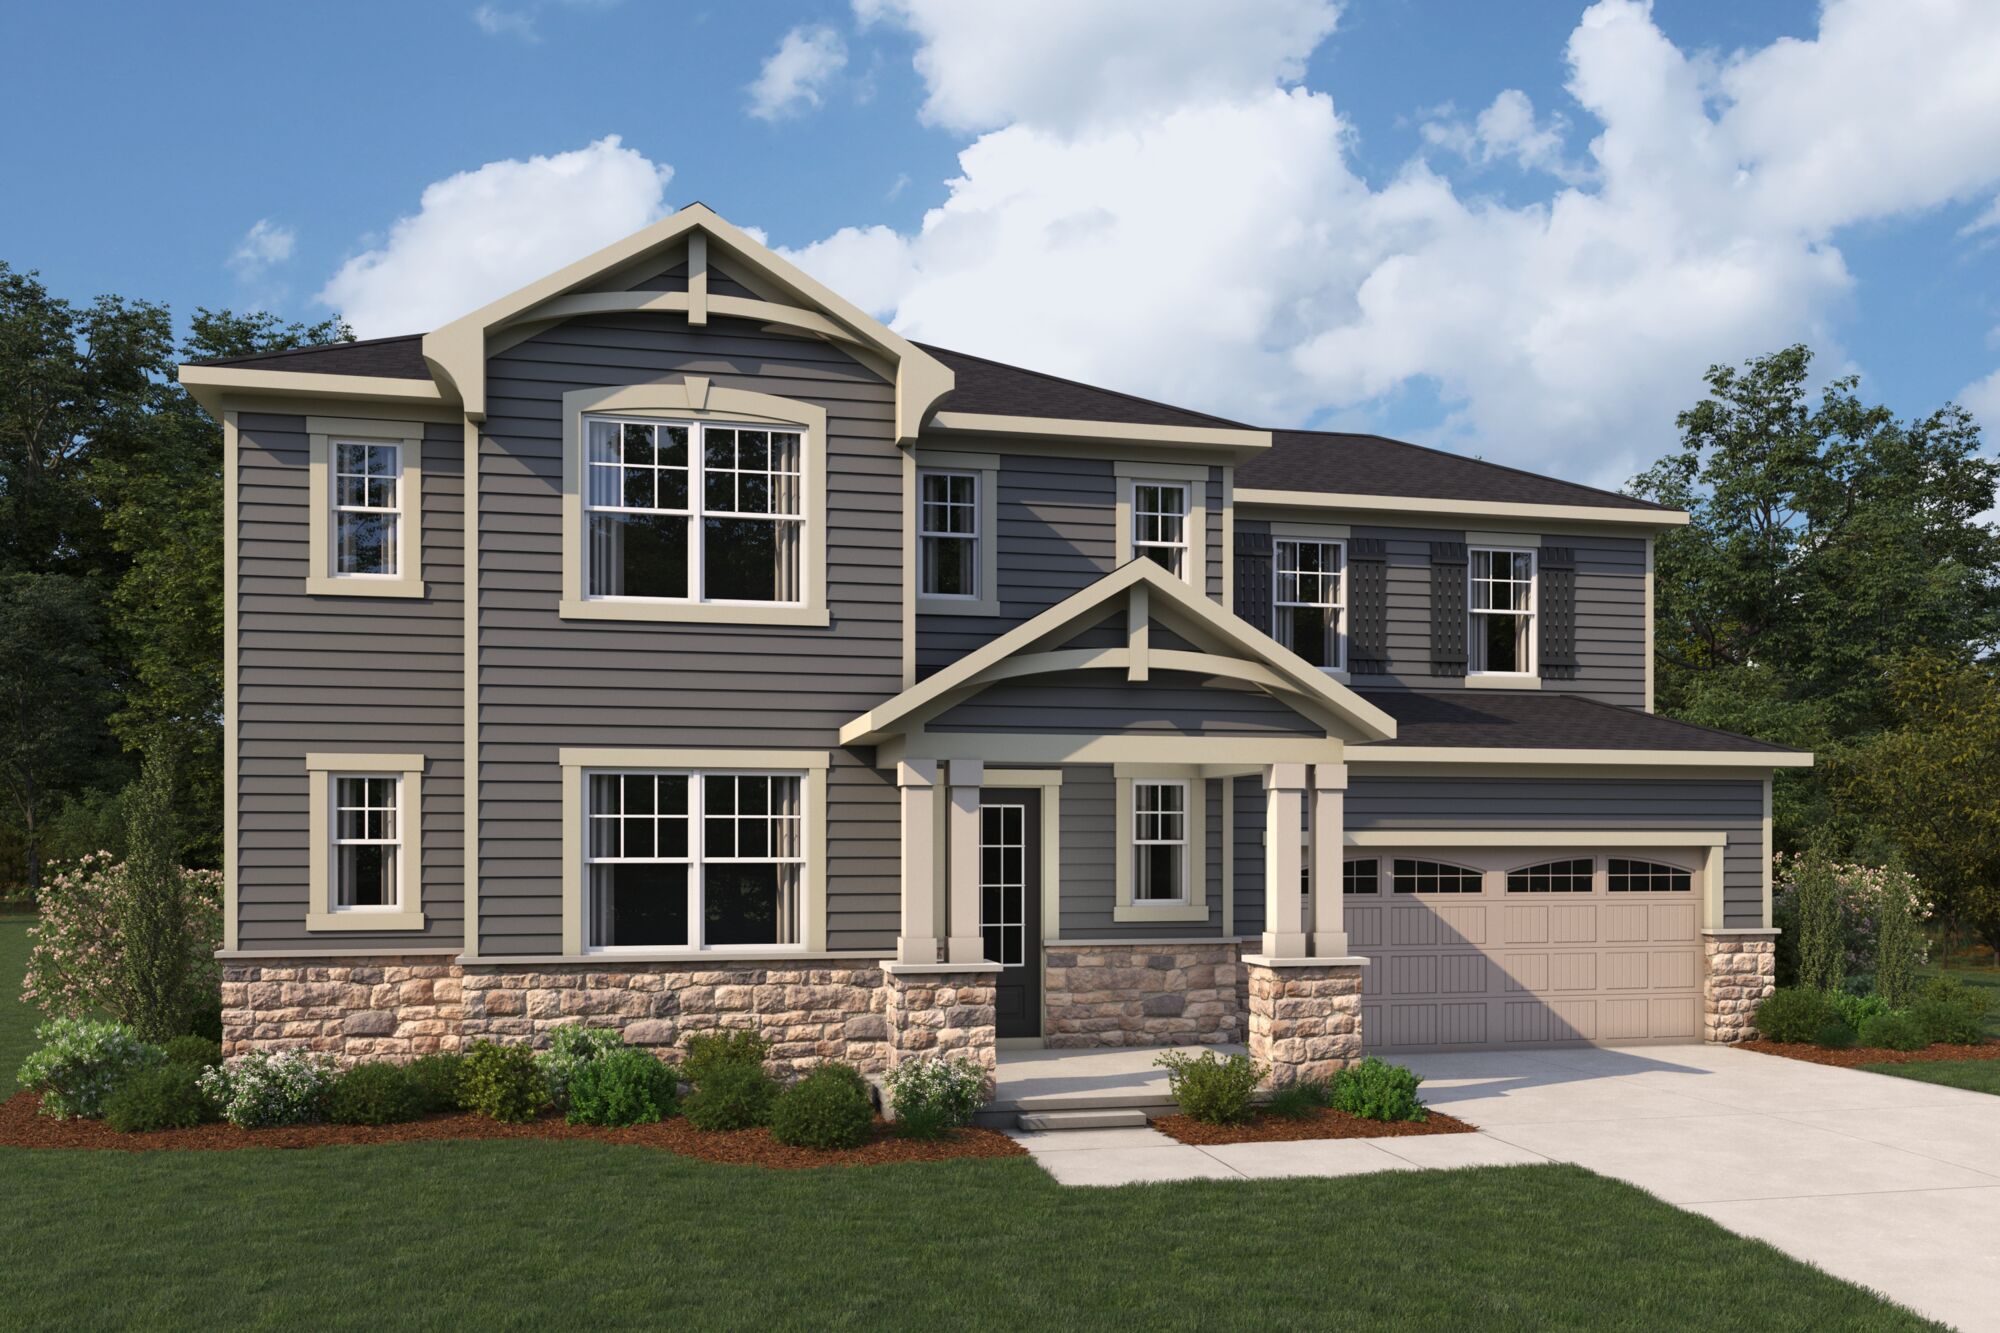  Elevation Front with window, garage, exterior stone and exterior clapboard